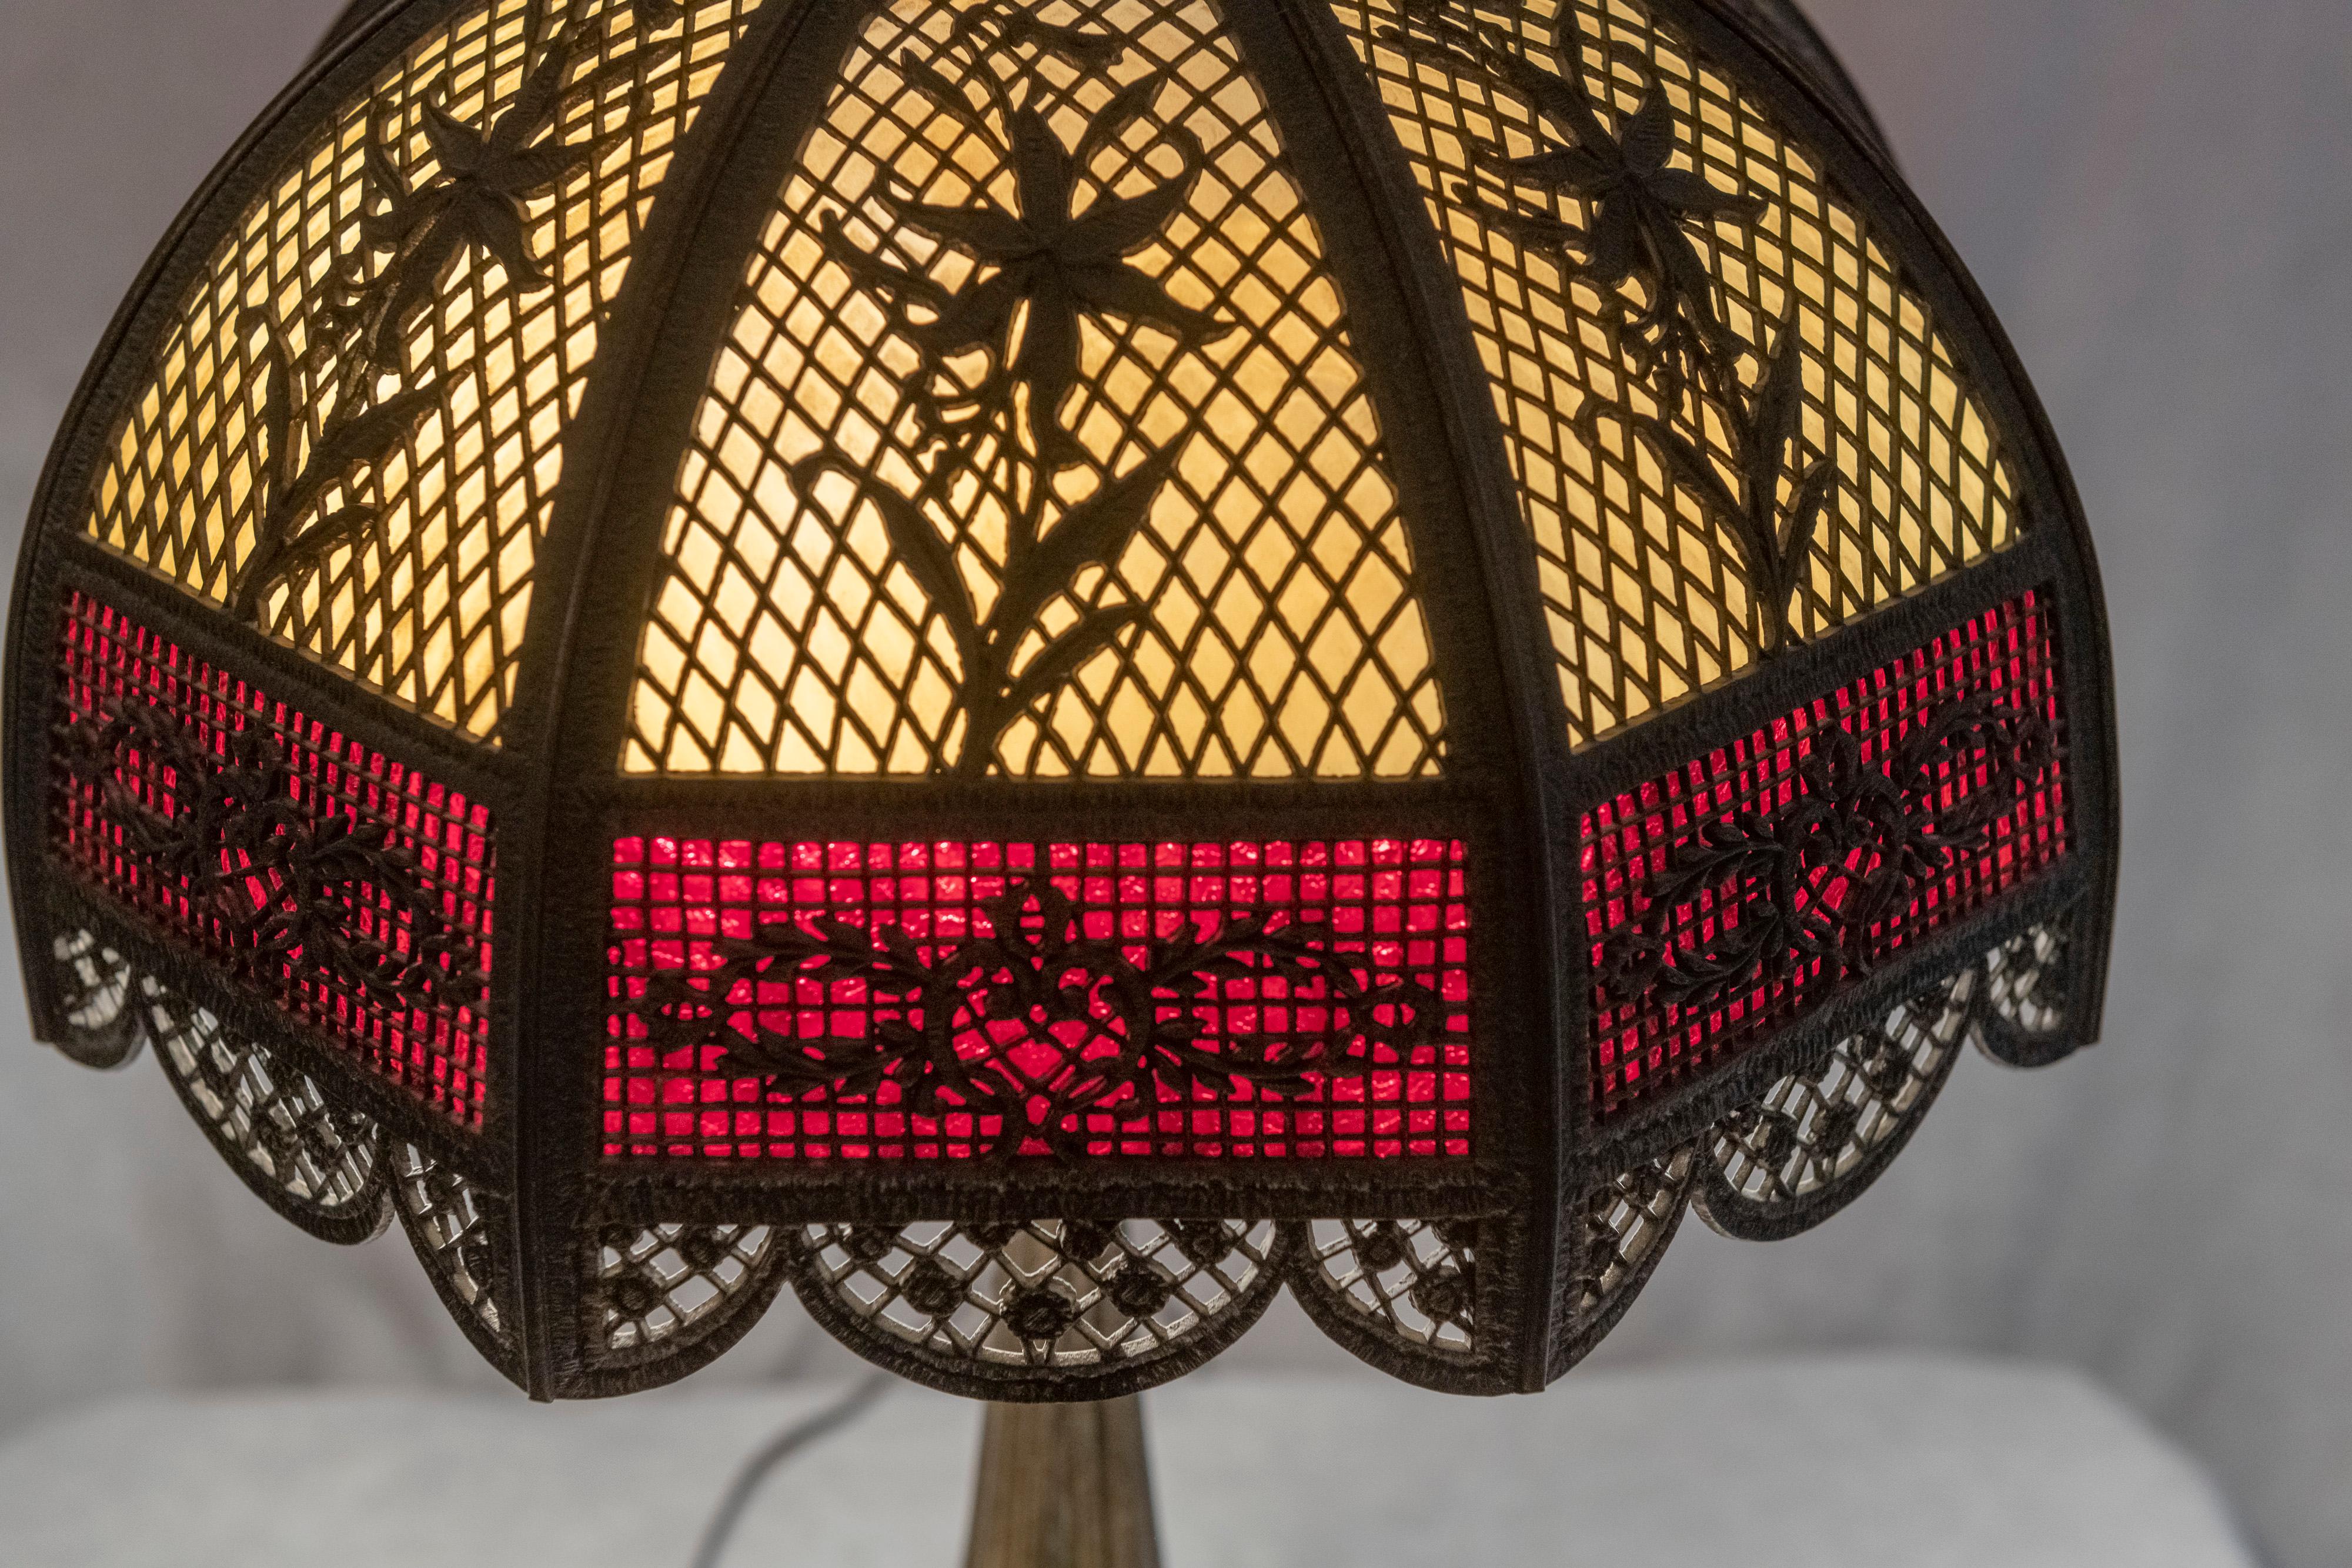 A top of the line panel lamp by Bradley & Hubbard, well known for producing some of the best panel lamps at the early part of the 20th century. The overlay is very attractive and there is plenty of it. The rich ruby red lower section of glass is a